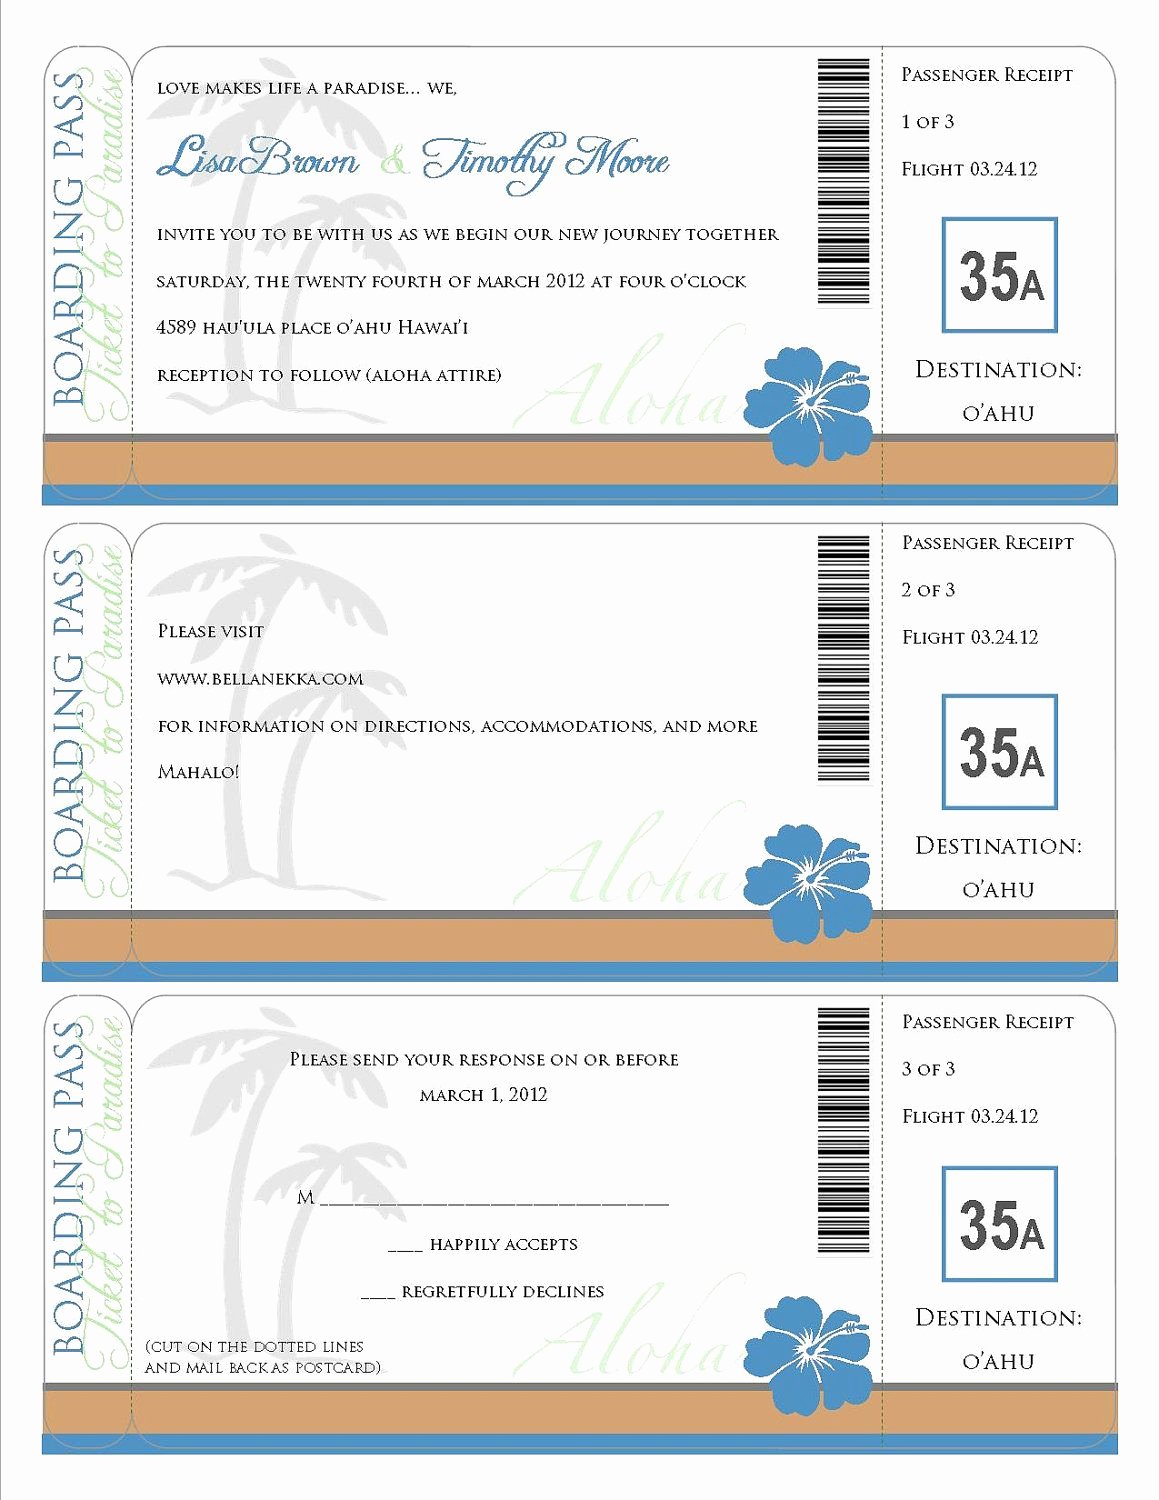 Boarding Pass Template Free Inspirational Printable Boarding Pass Travel Information Invitation